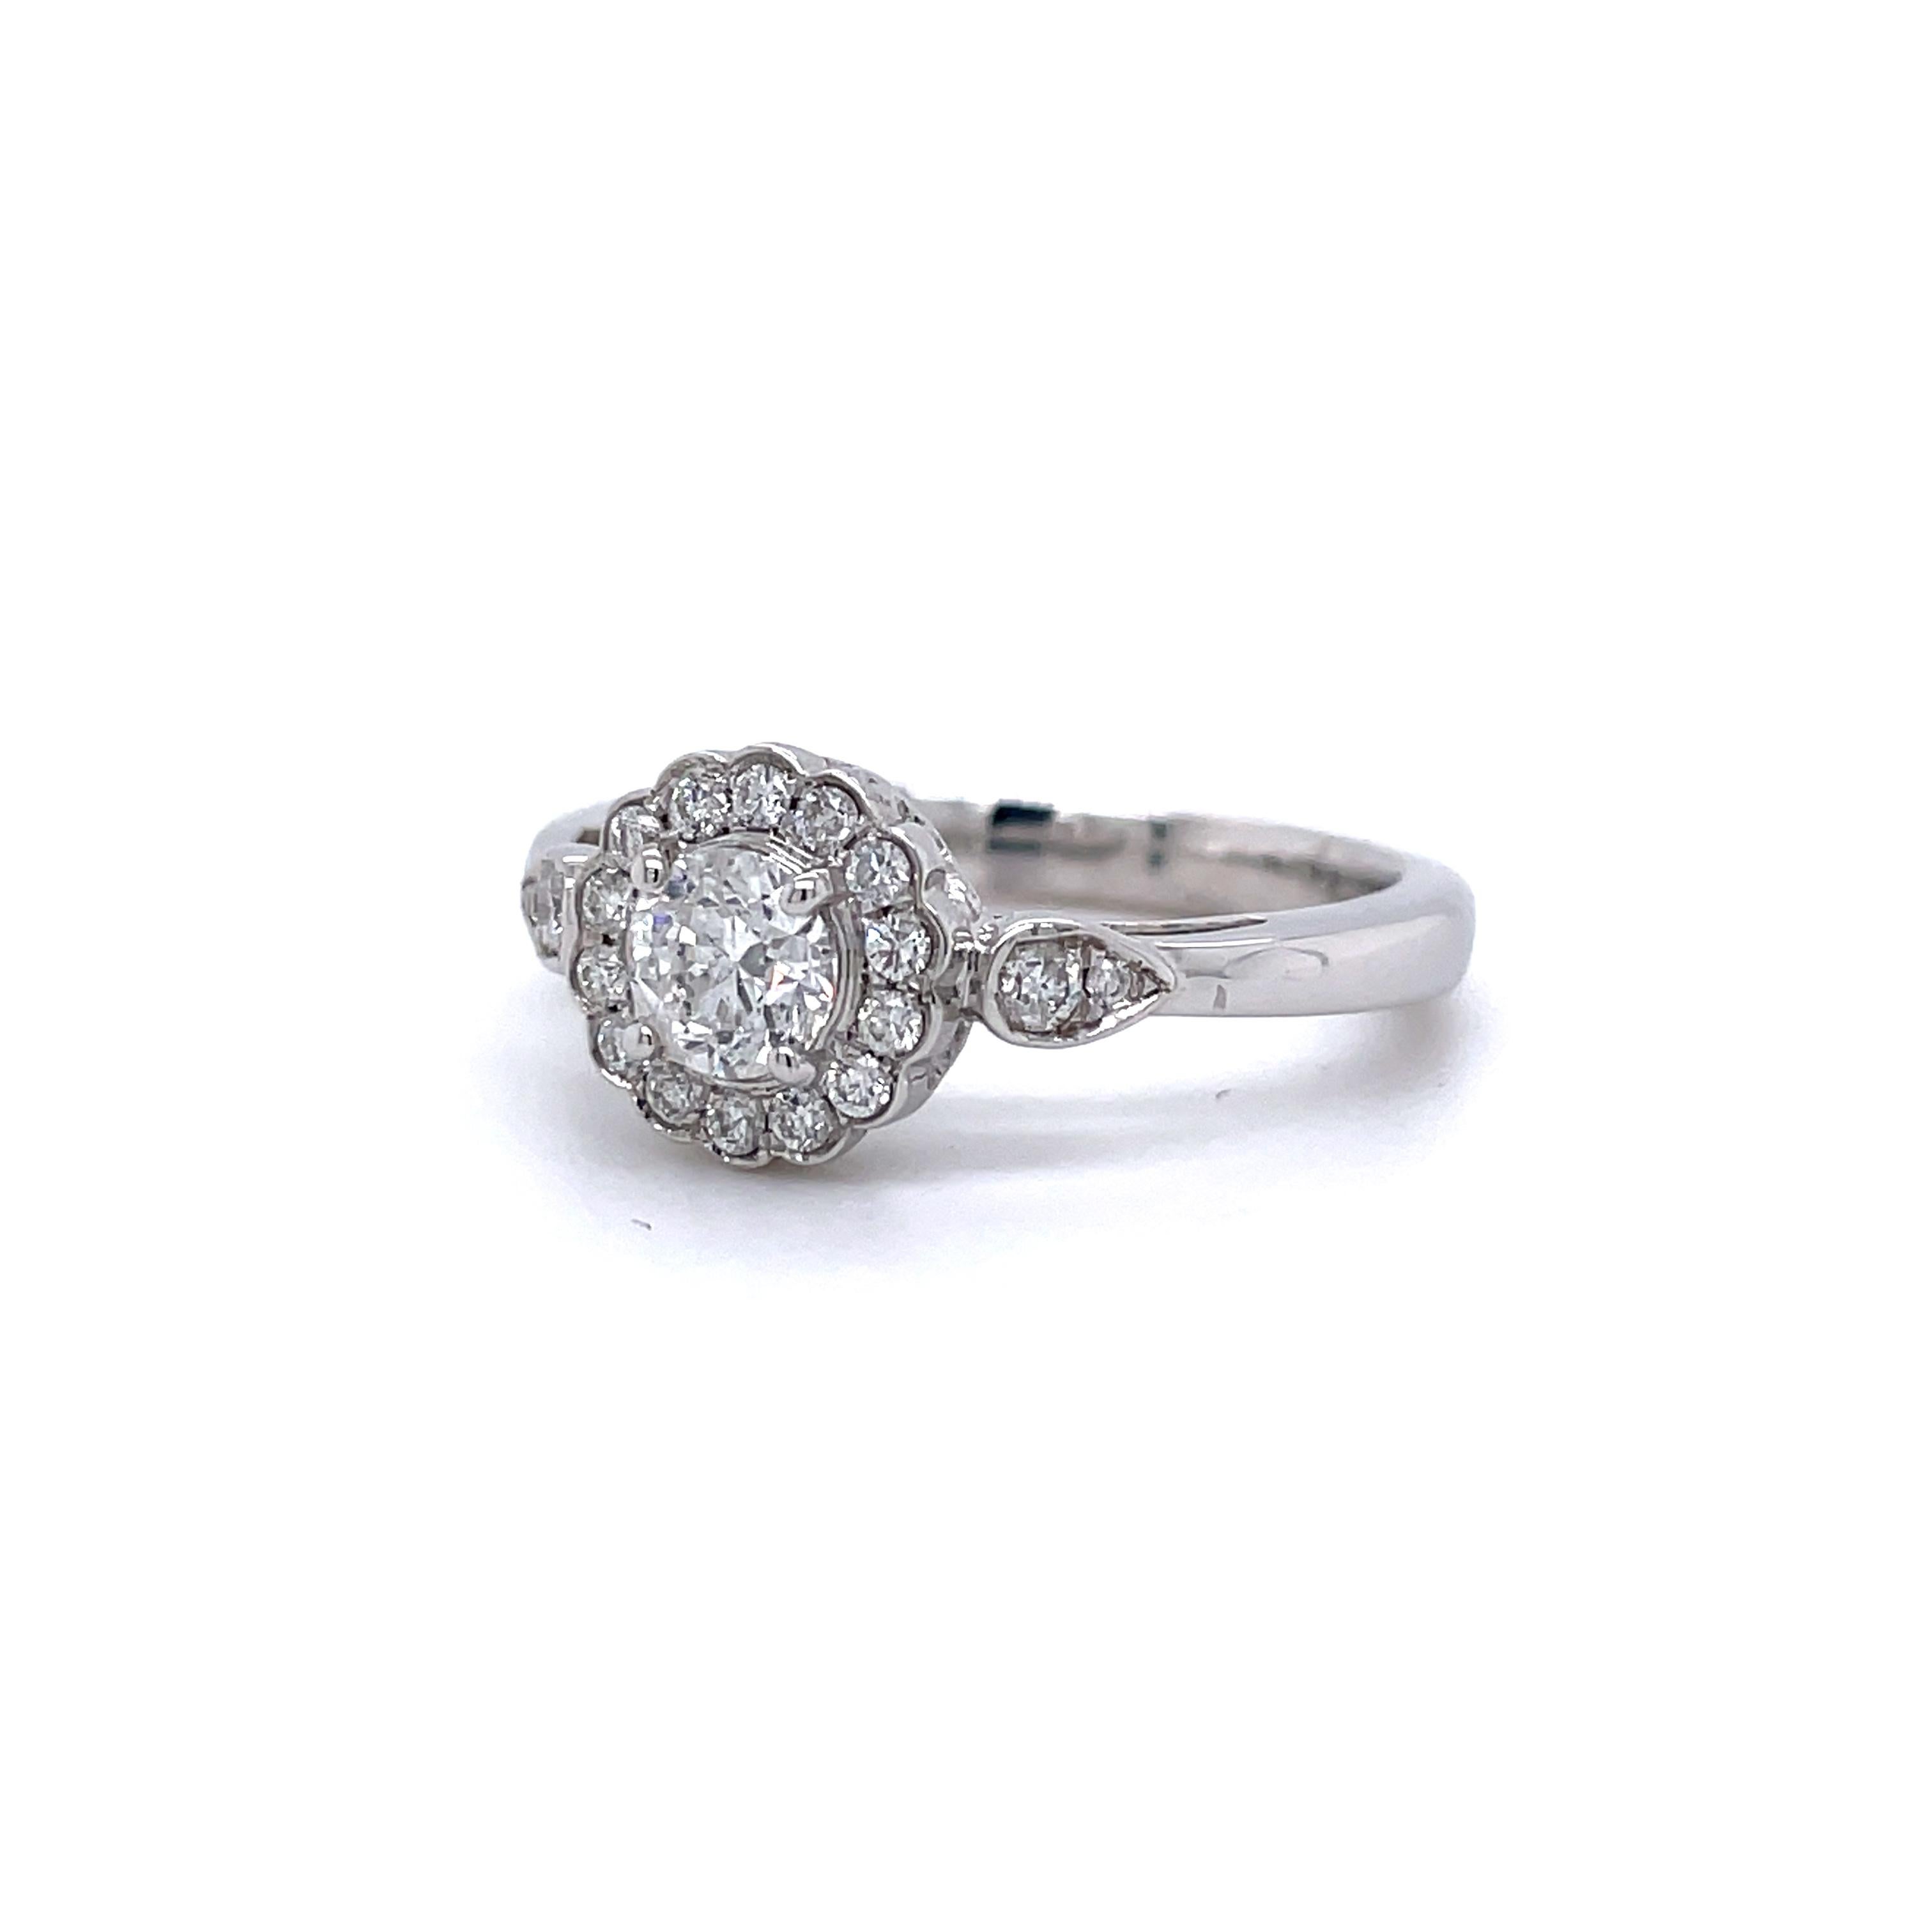 This lovely diamond ring has a beautiful 0.48 ct (G-H Color, I1 Clarity) round brilliant diamond in the center with an additional 18 diamonds weighing 0.24 cttw (H-I Color, I1-I2 Clarity) accenting the sides and the shimmering scalloped halo. The